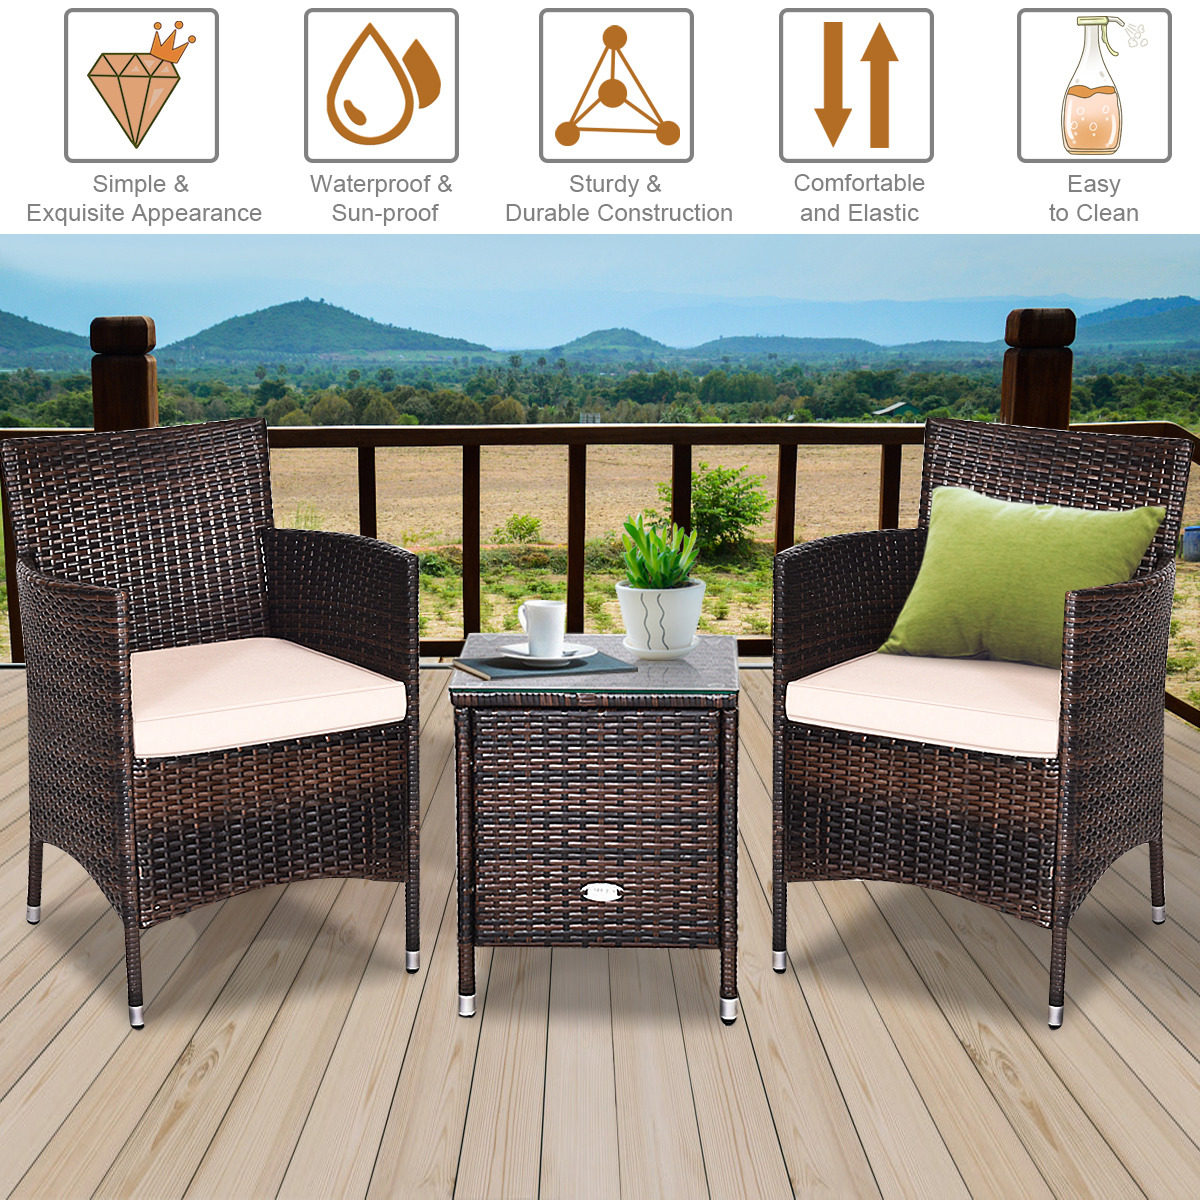 Gymax 3PCS Patio Rattan Chair & Table Furniture Set Outdoor w/ Beige Cushion - image 6 of 10